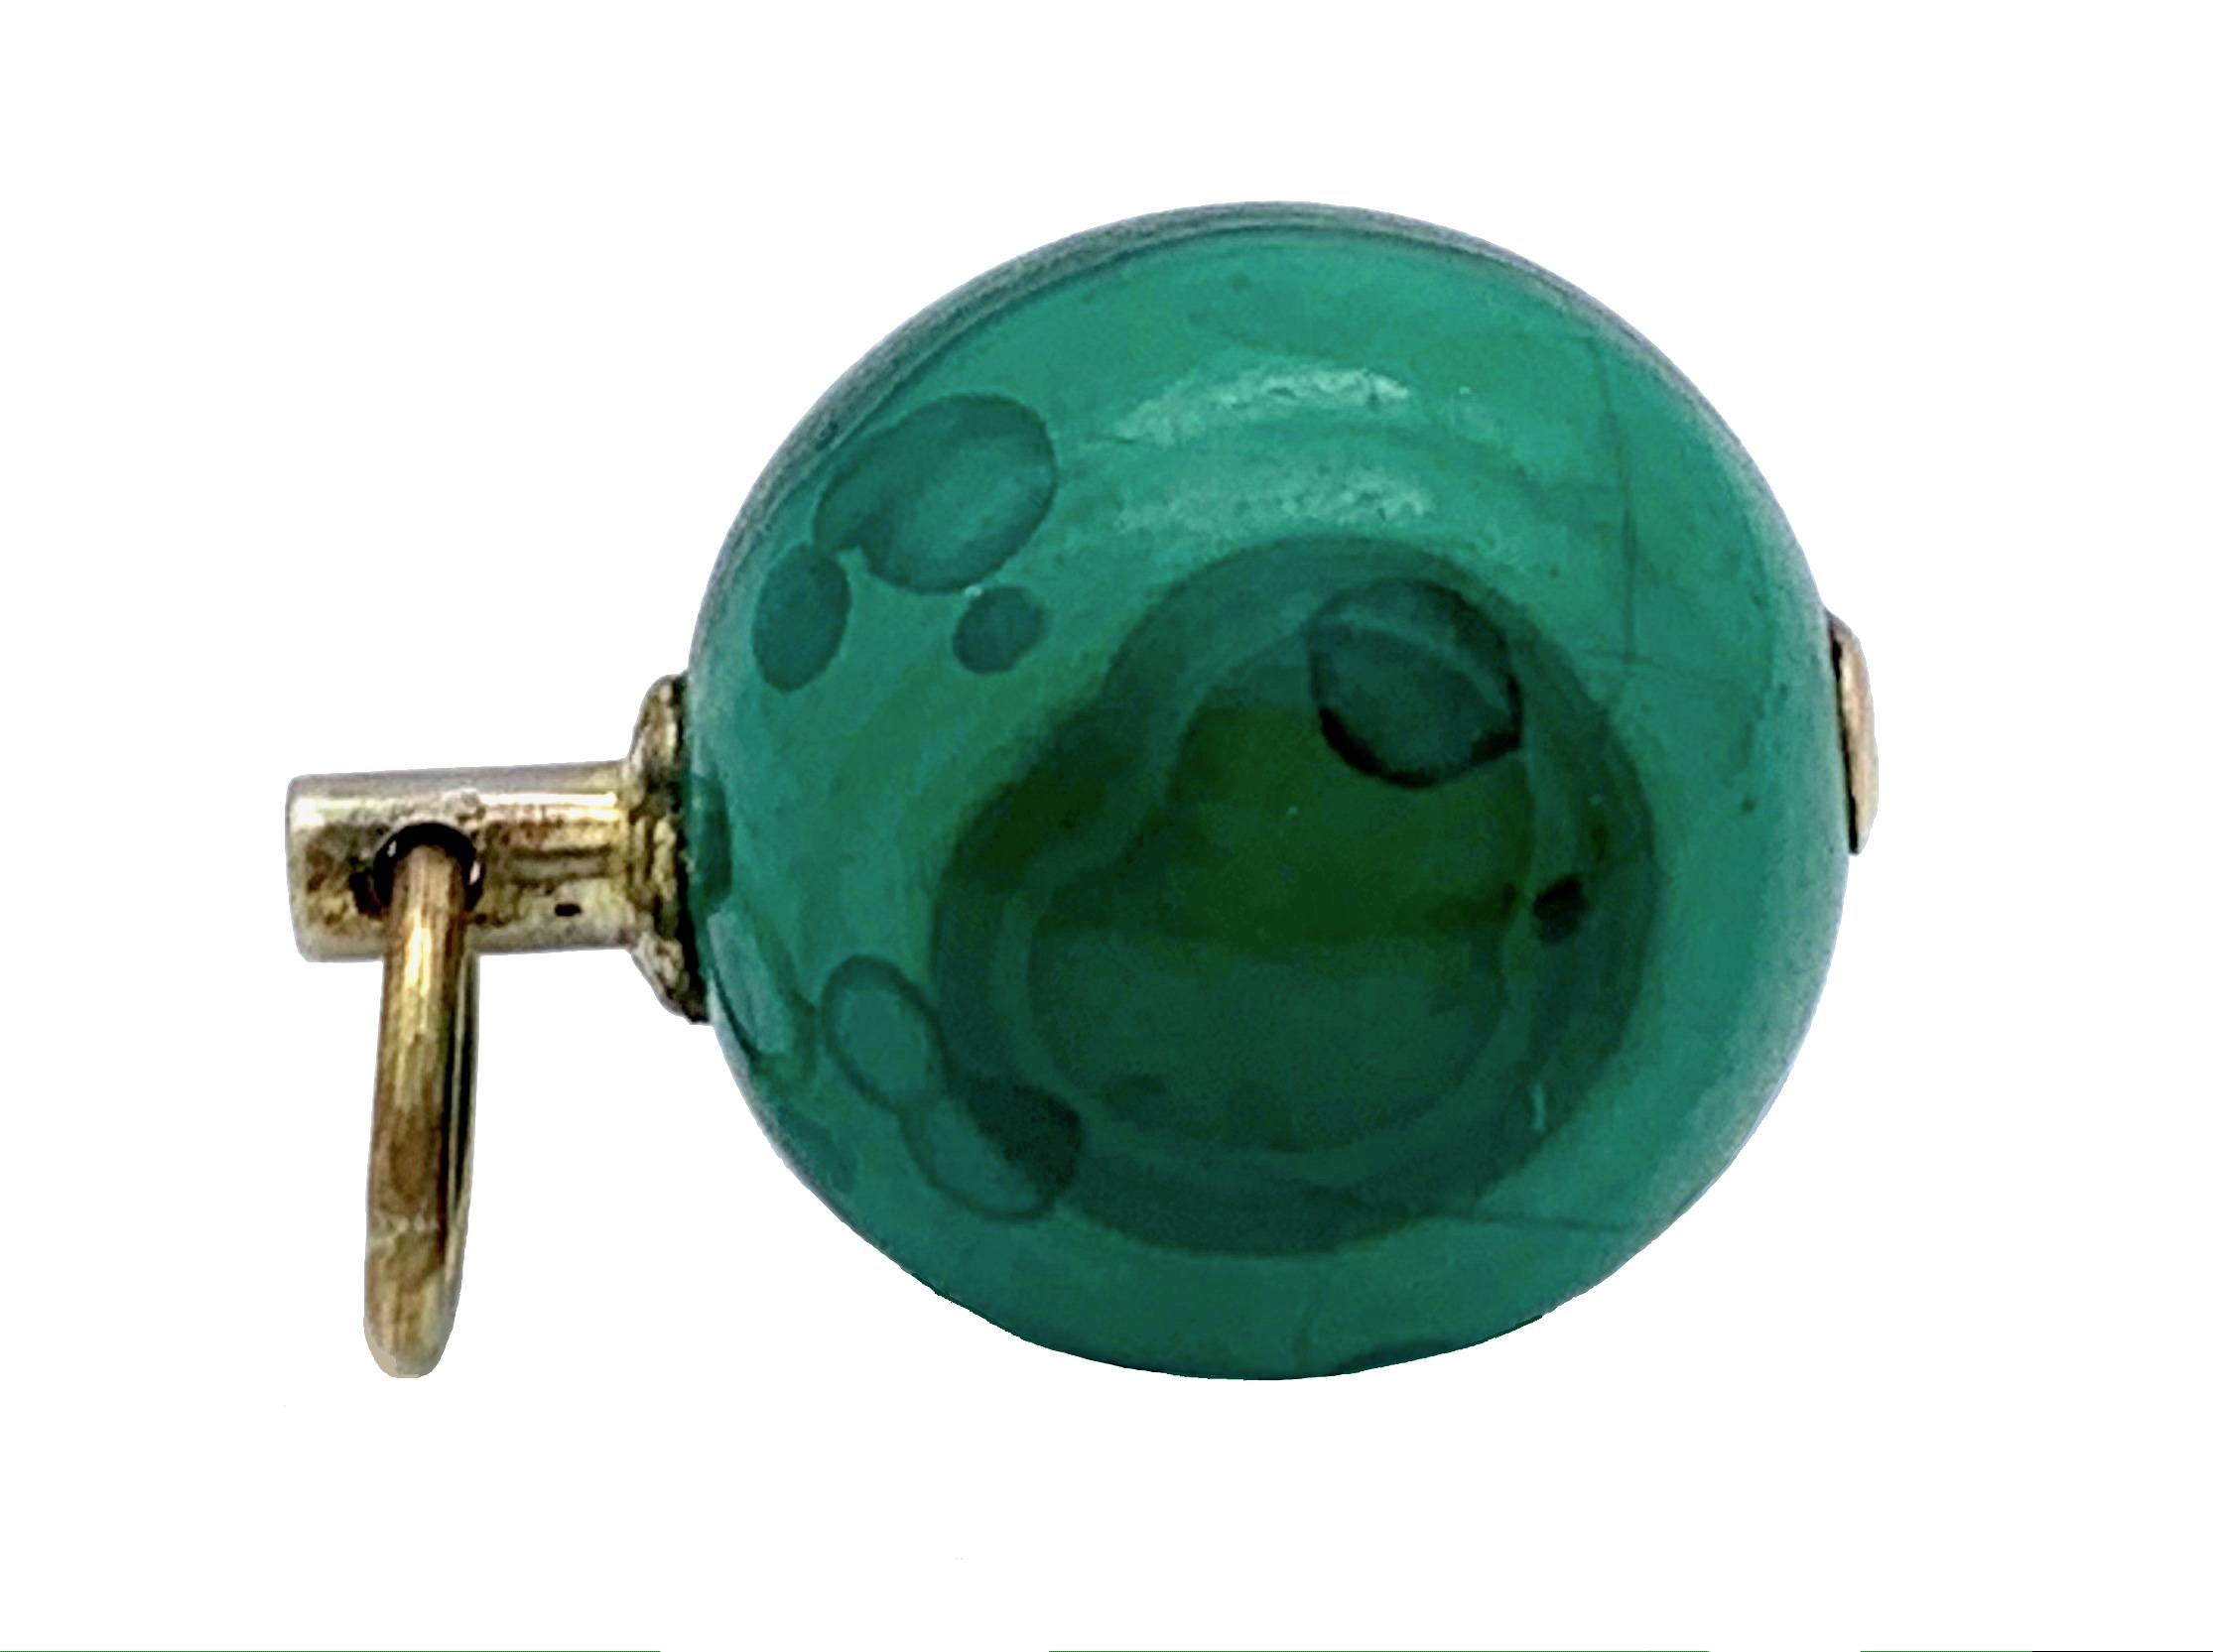 This beautiful watch key in the shape of an intense green malachite ball has been crafted in England in the second quarter of the nineteeth century. It used to be a fashionable accessory on the watchchain of a georgian gentleman.
Today it could also